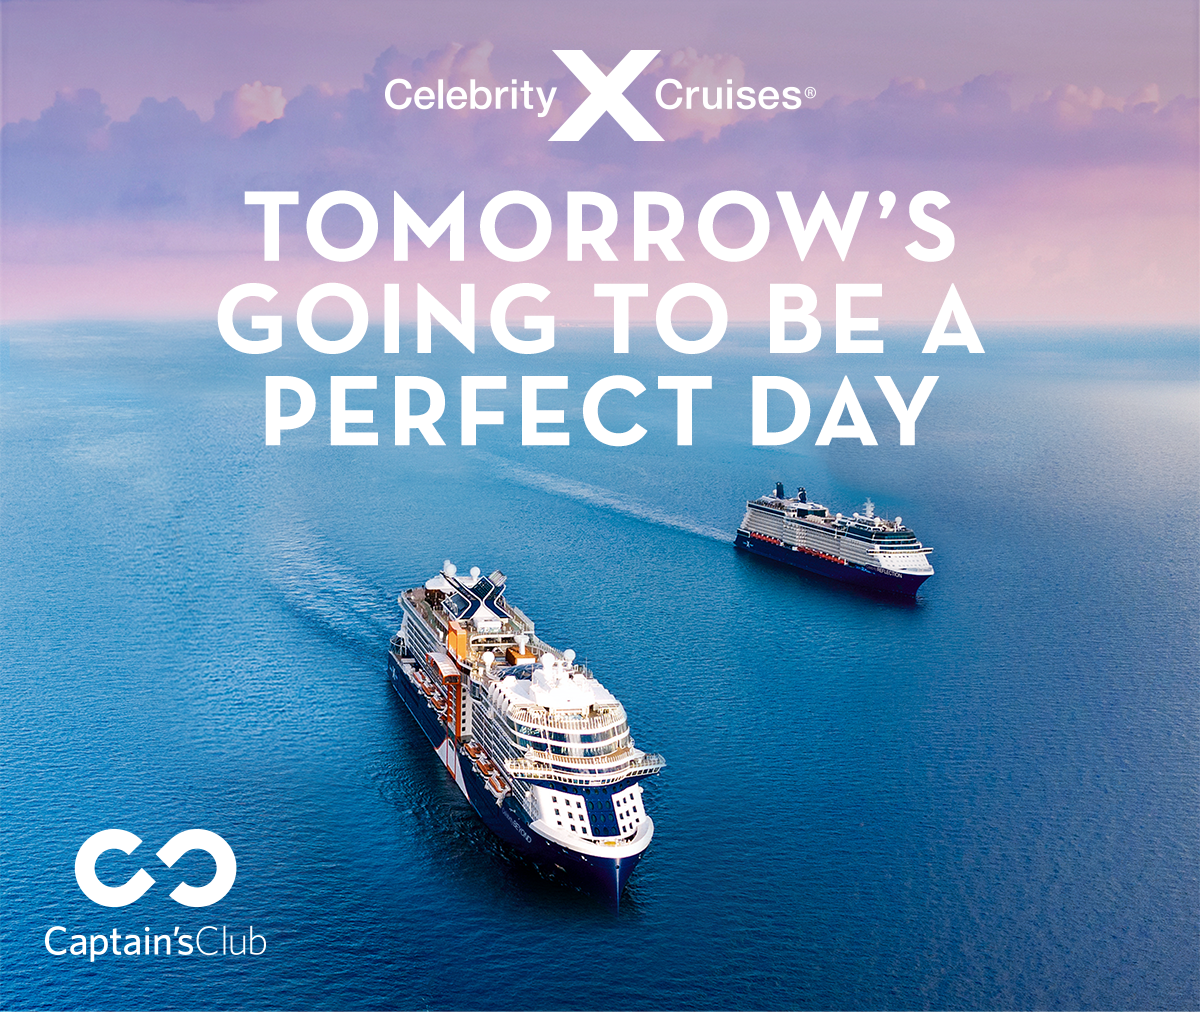 Celebrity Cruises Hints at Sailings to Perfect Day at CocoCay